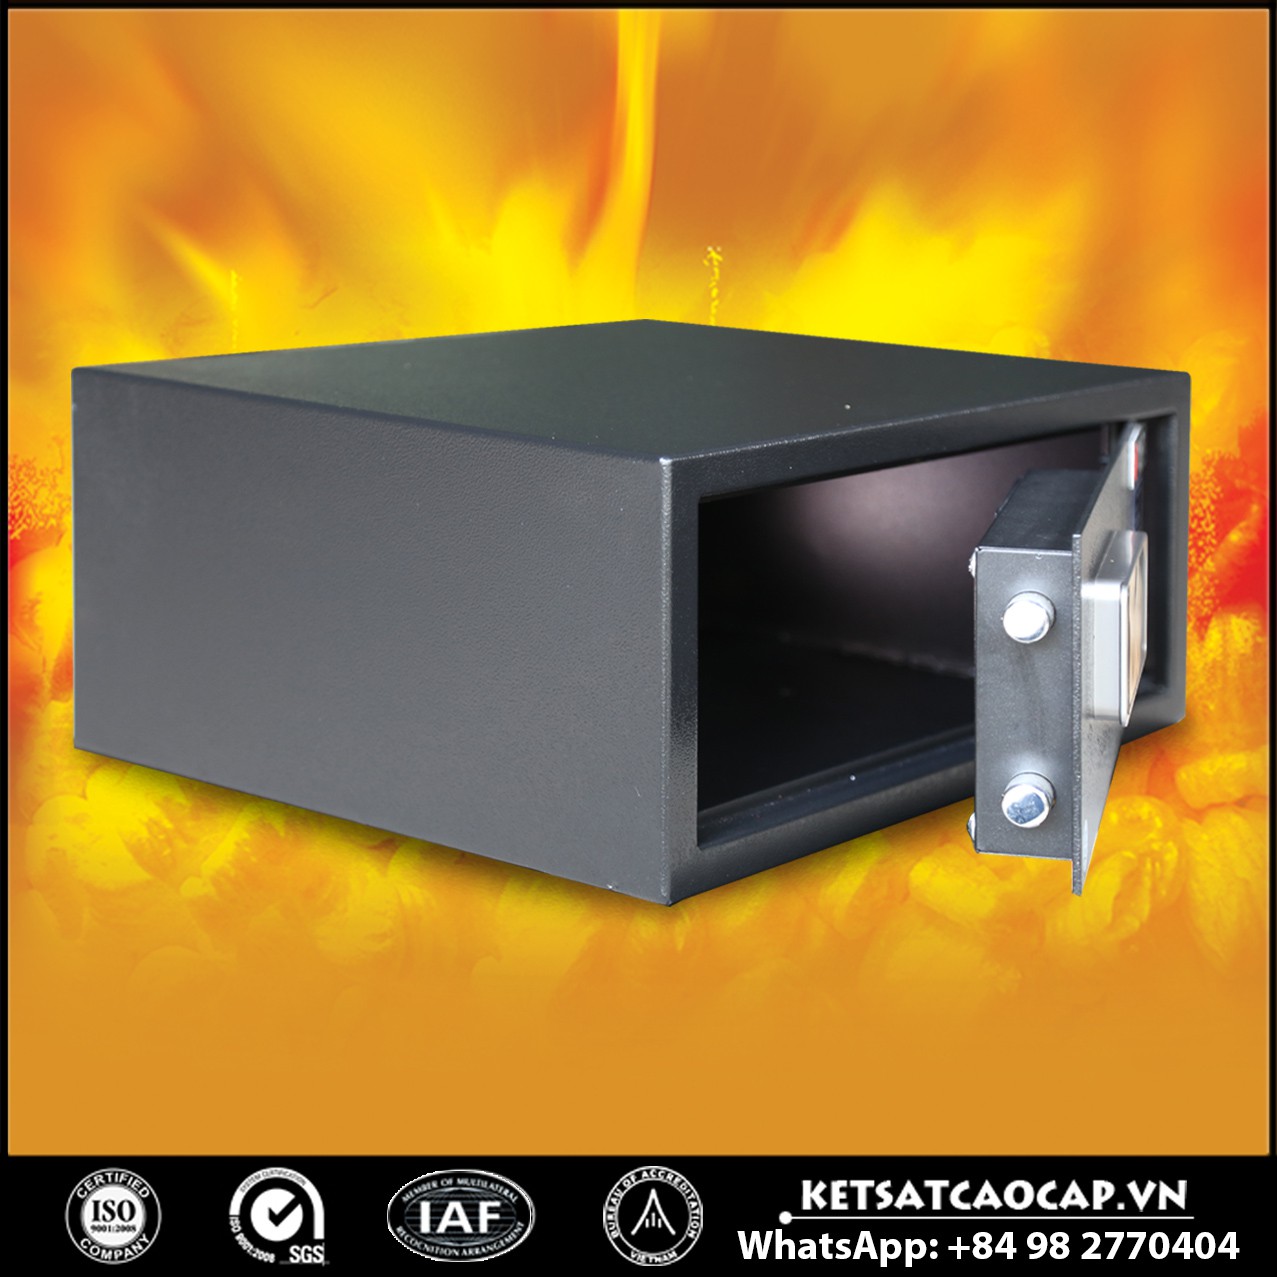 Portable Hotel Safes Suppliers and Exporters‎